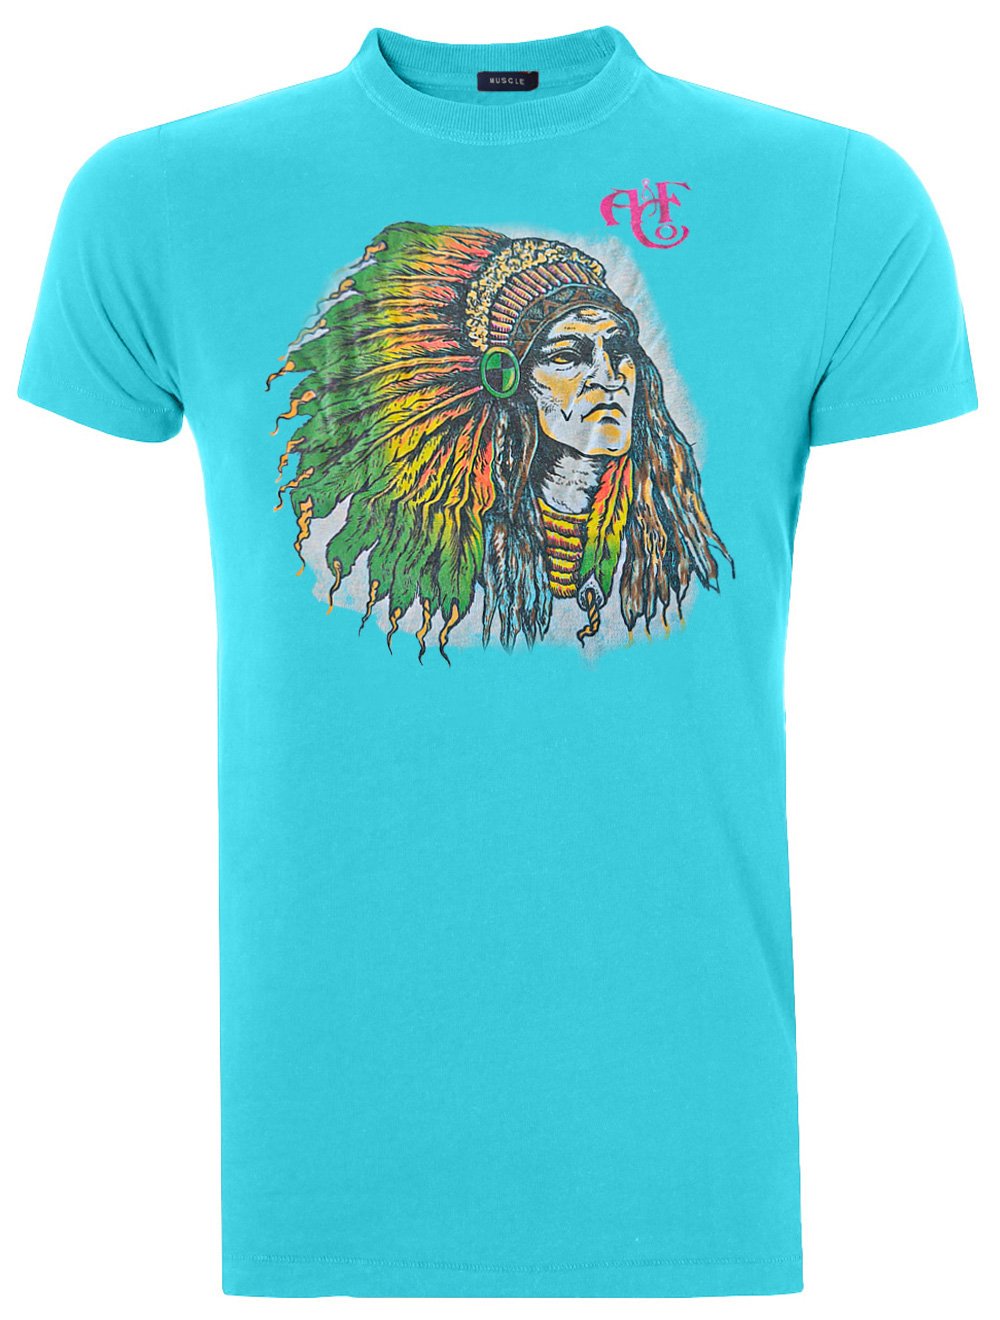 Camiseta Abercrombie Masculina Muscle Sketch Indian Chief Azul Claro